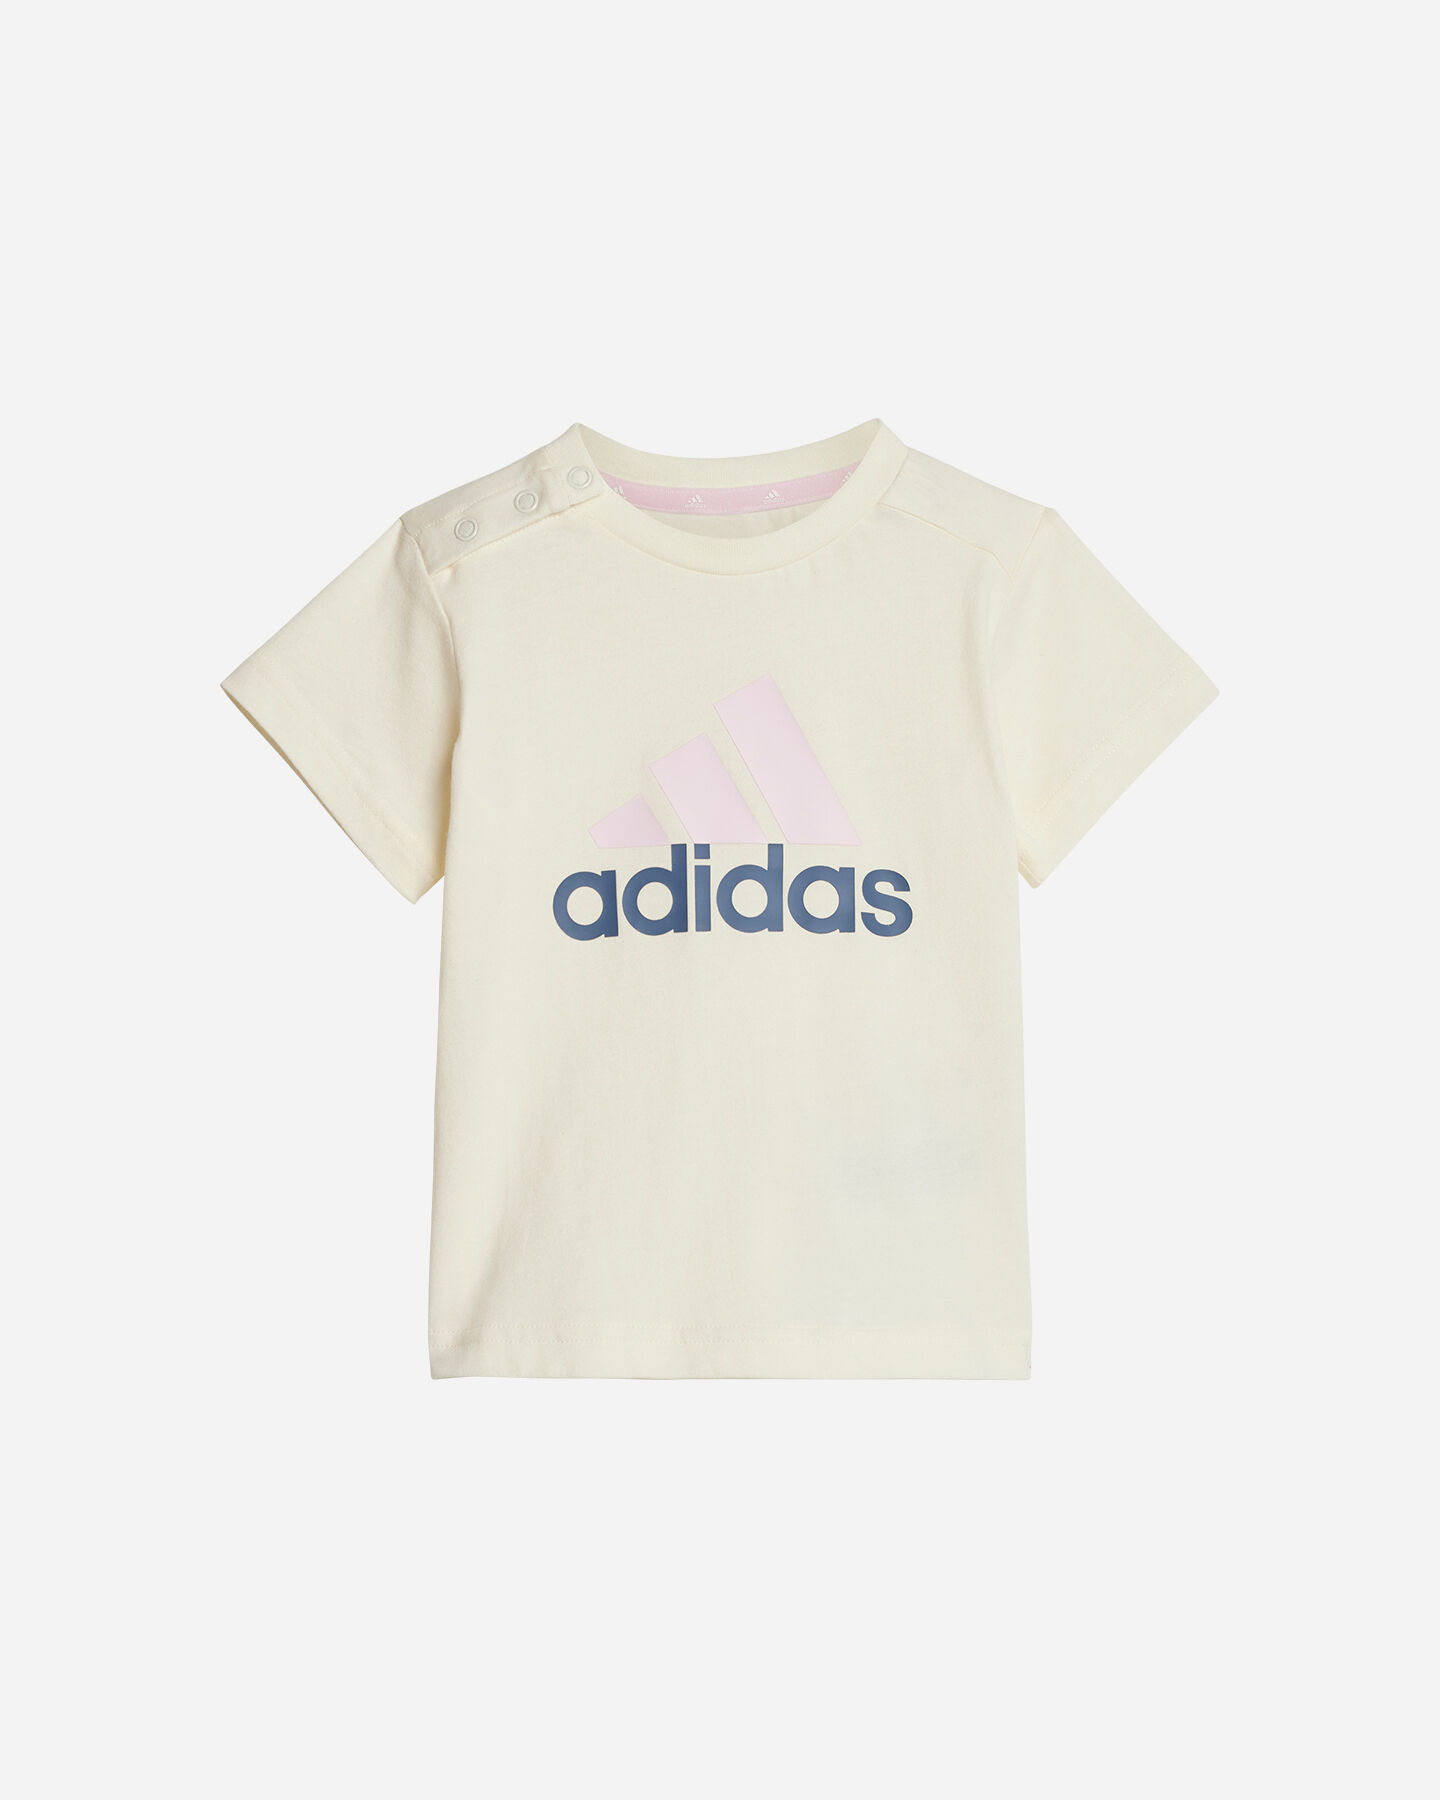  Completo ADIDAS INFANT GIRL JR S5656390|UNI|3-6M scatto 1